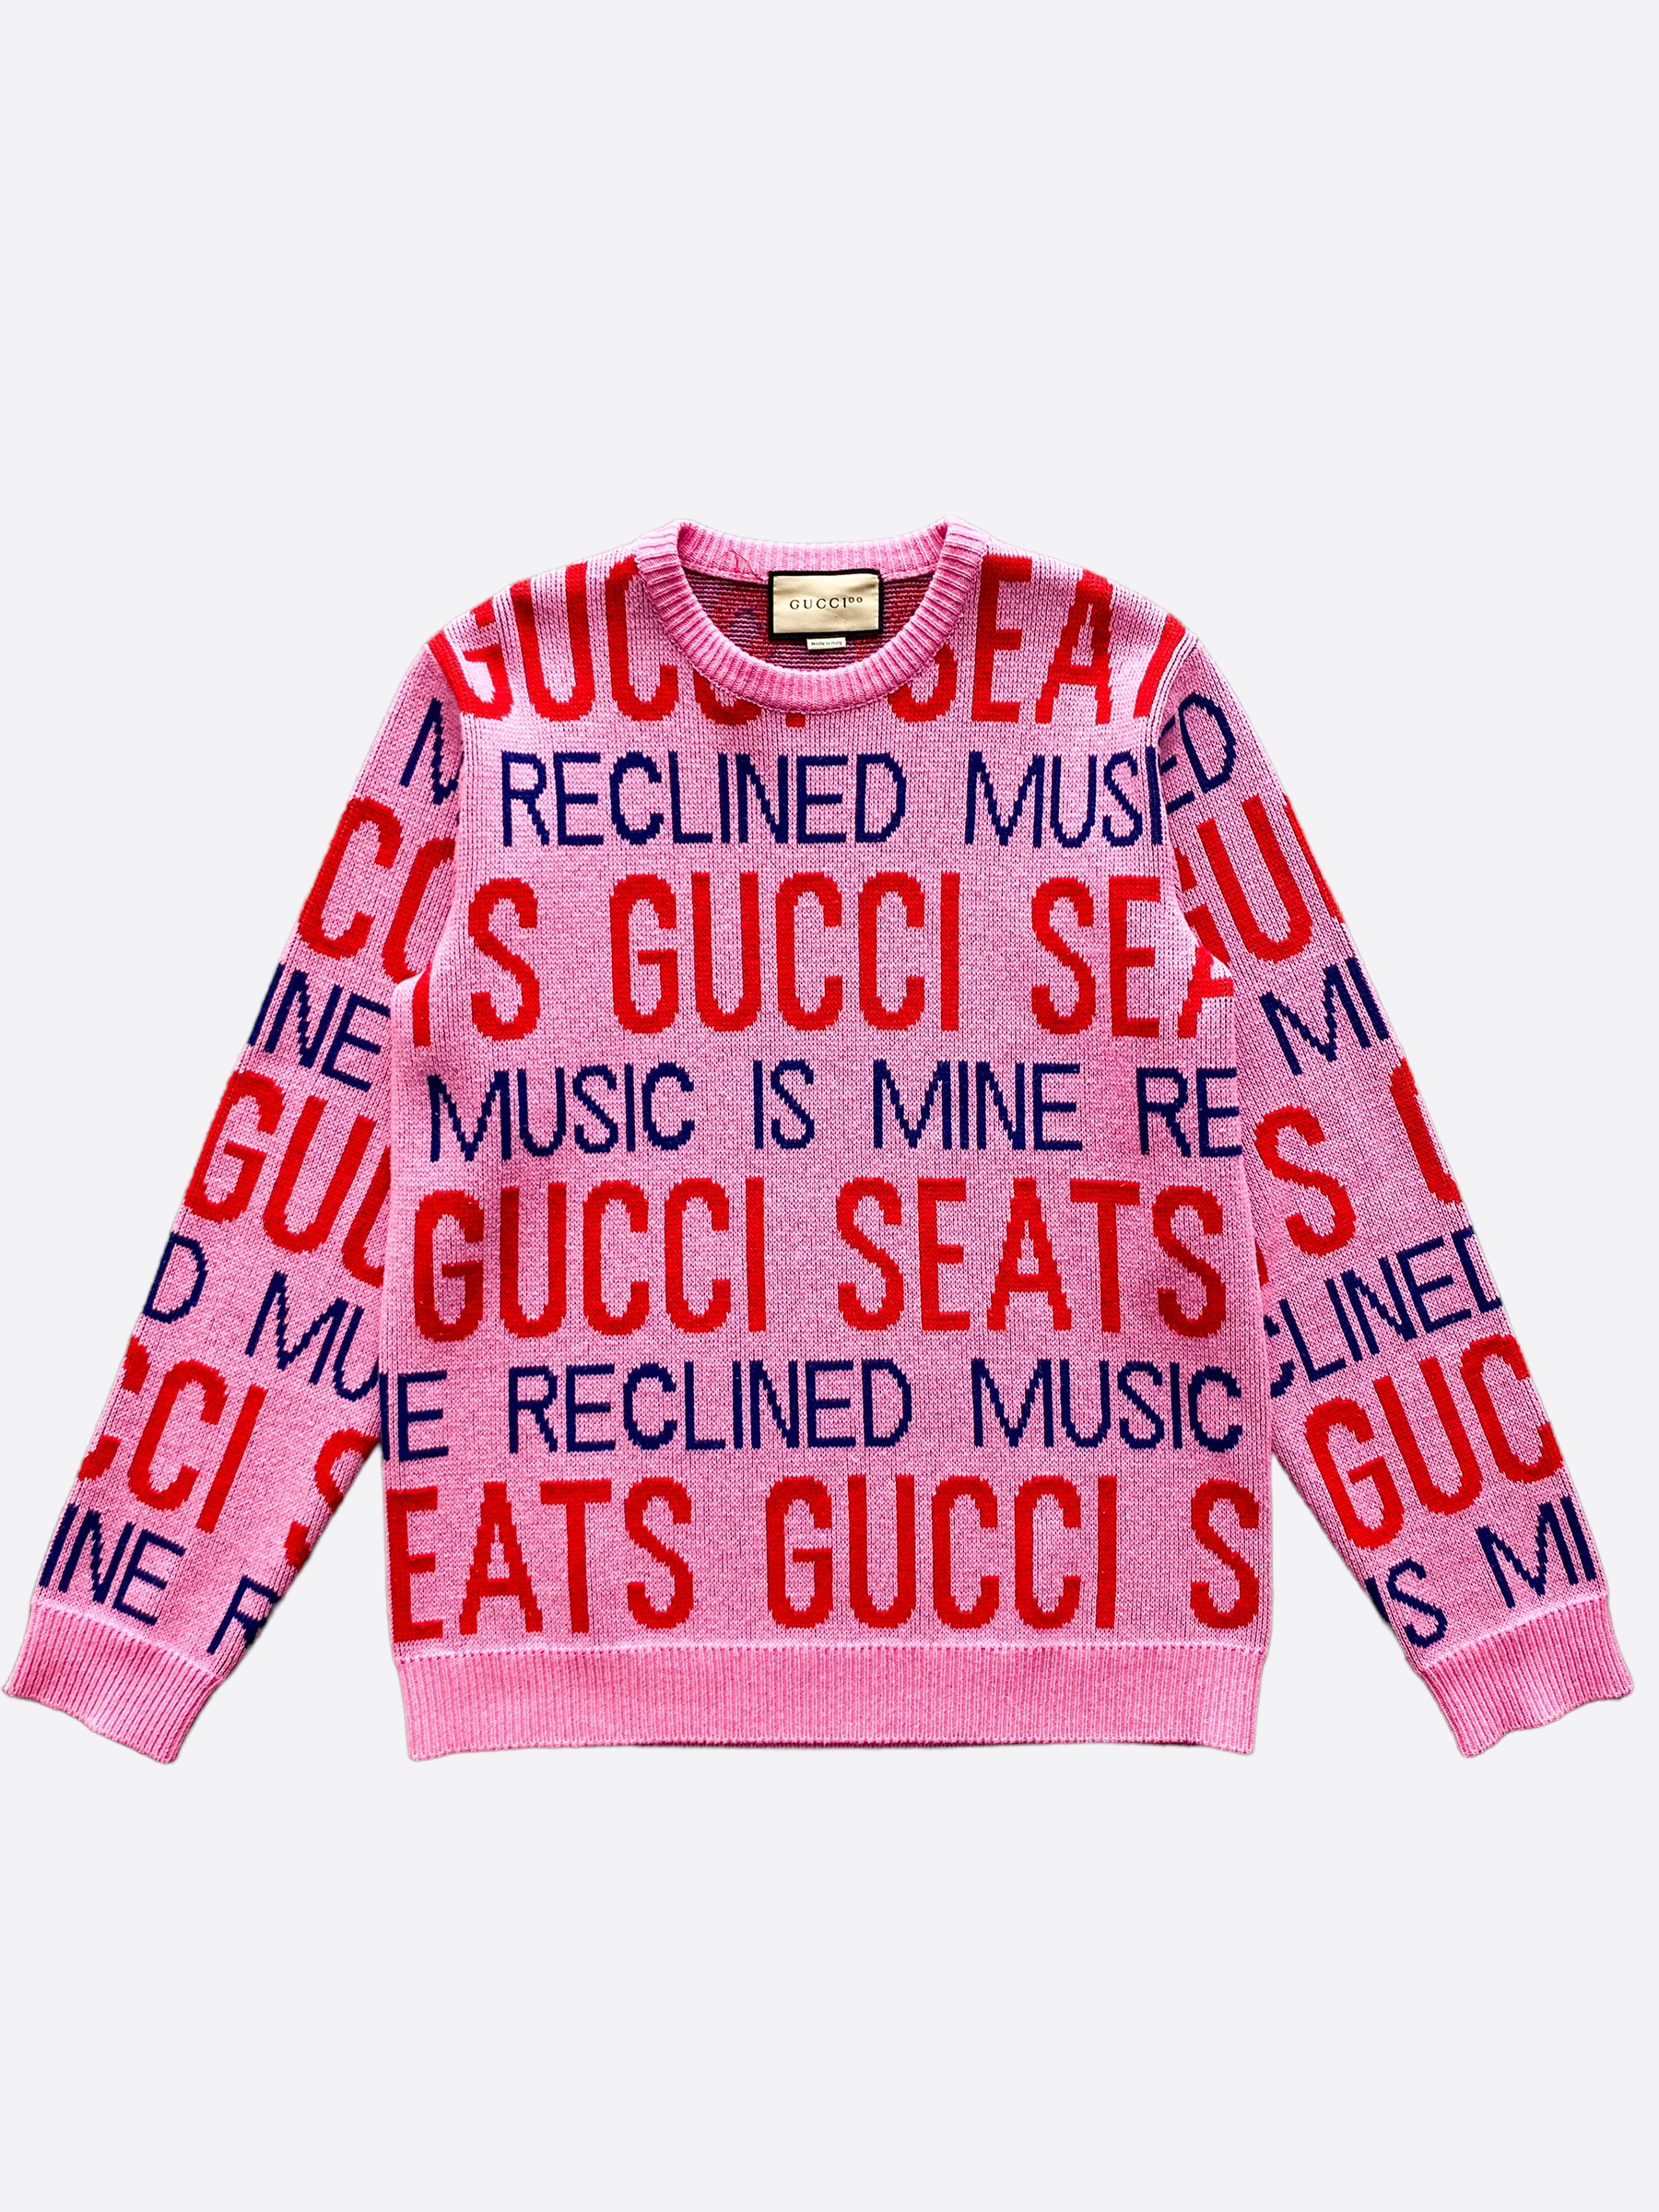 Gucci Bear Wool Jacquard Sweater in Pink for Men